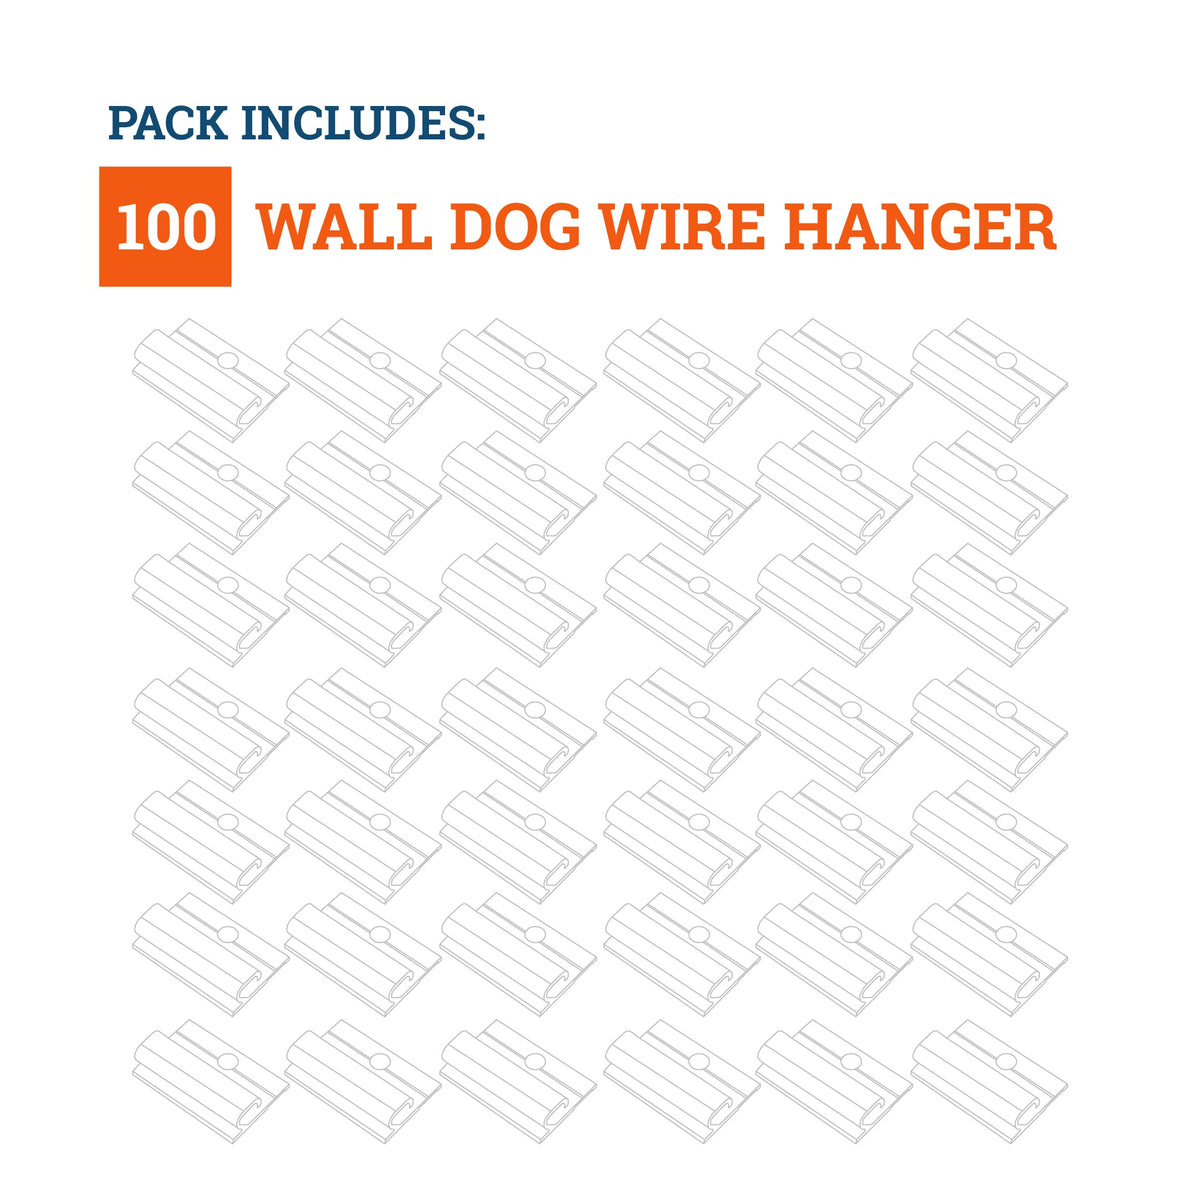 Wire Hanger 40 lbs - 100 Pack ($1.20 each)